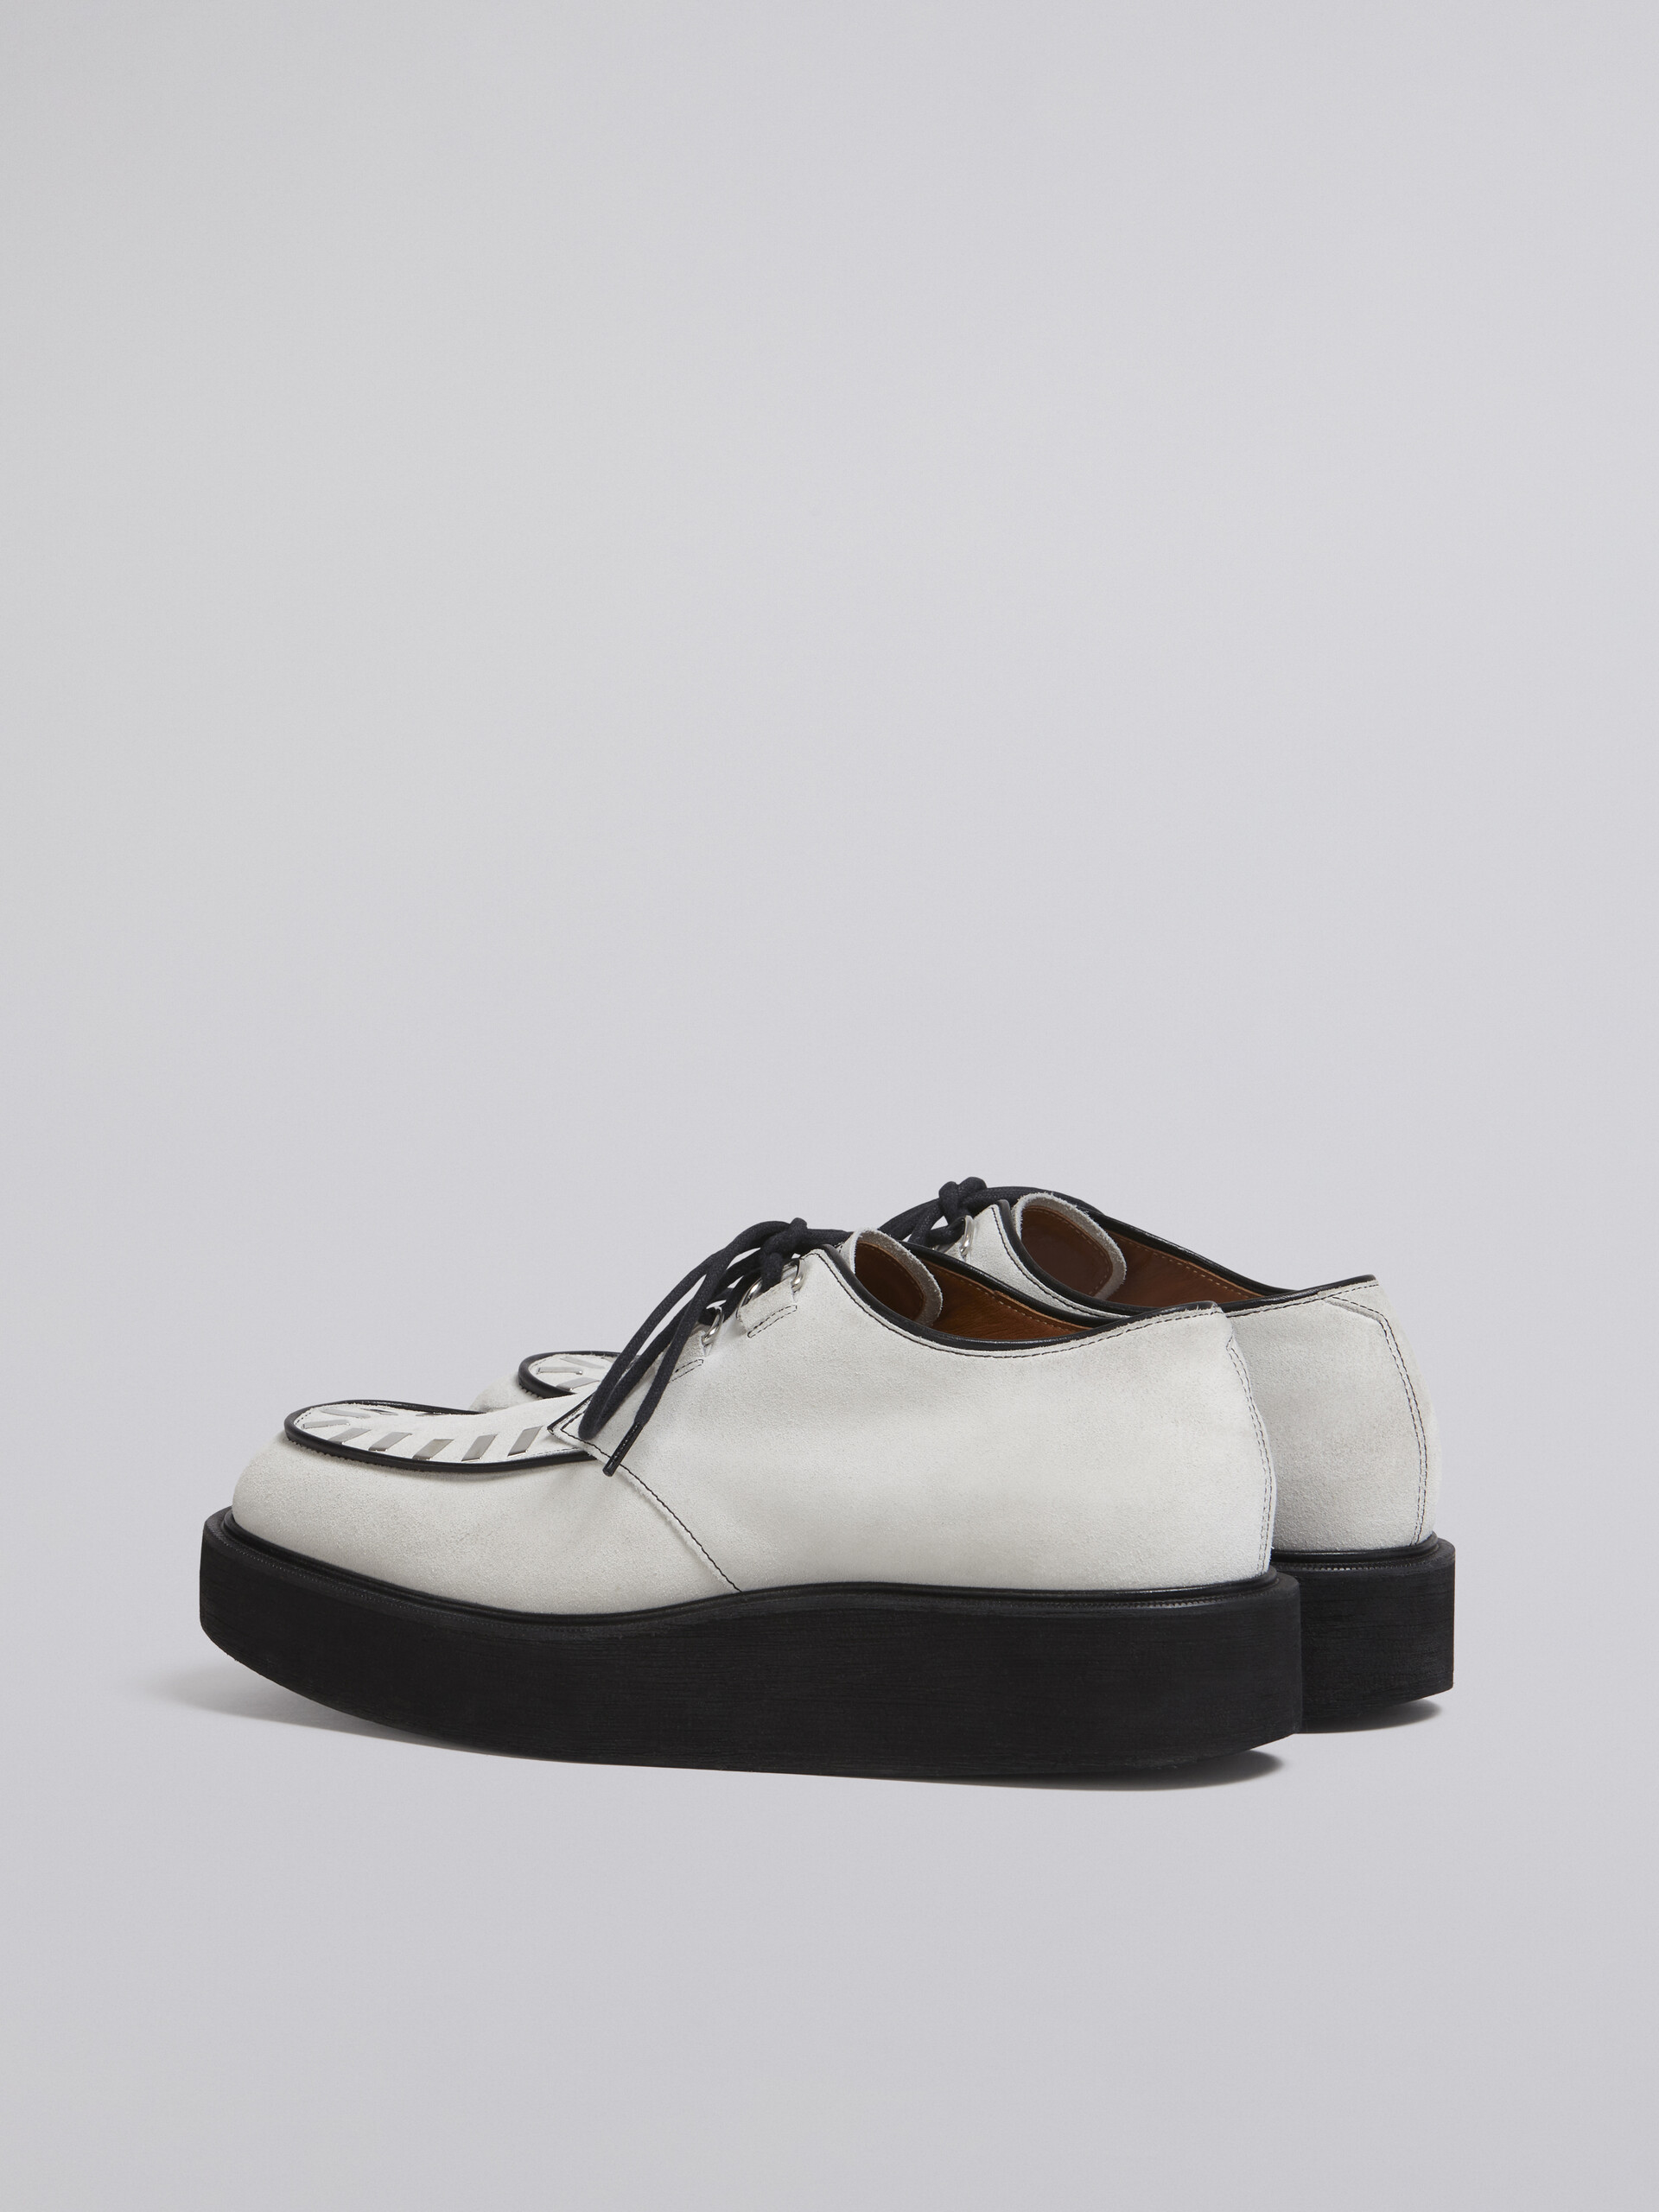 Calfskin lace-up with square toe - Lace-ups - Image 3